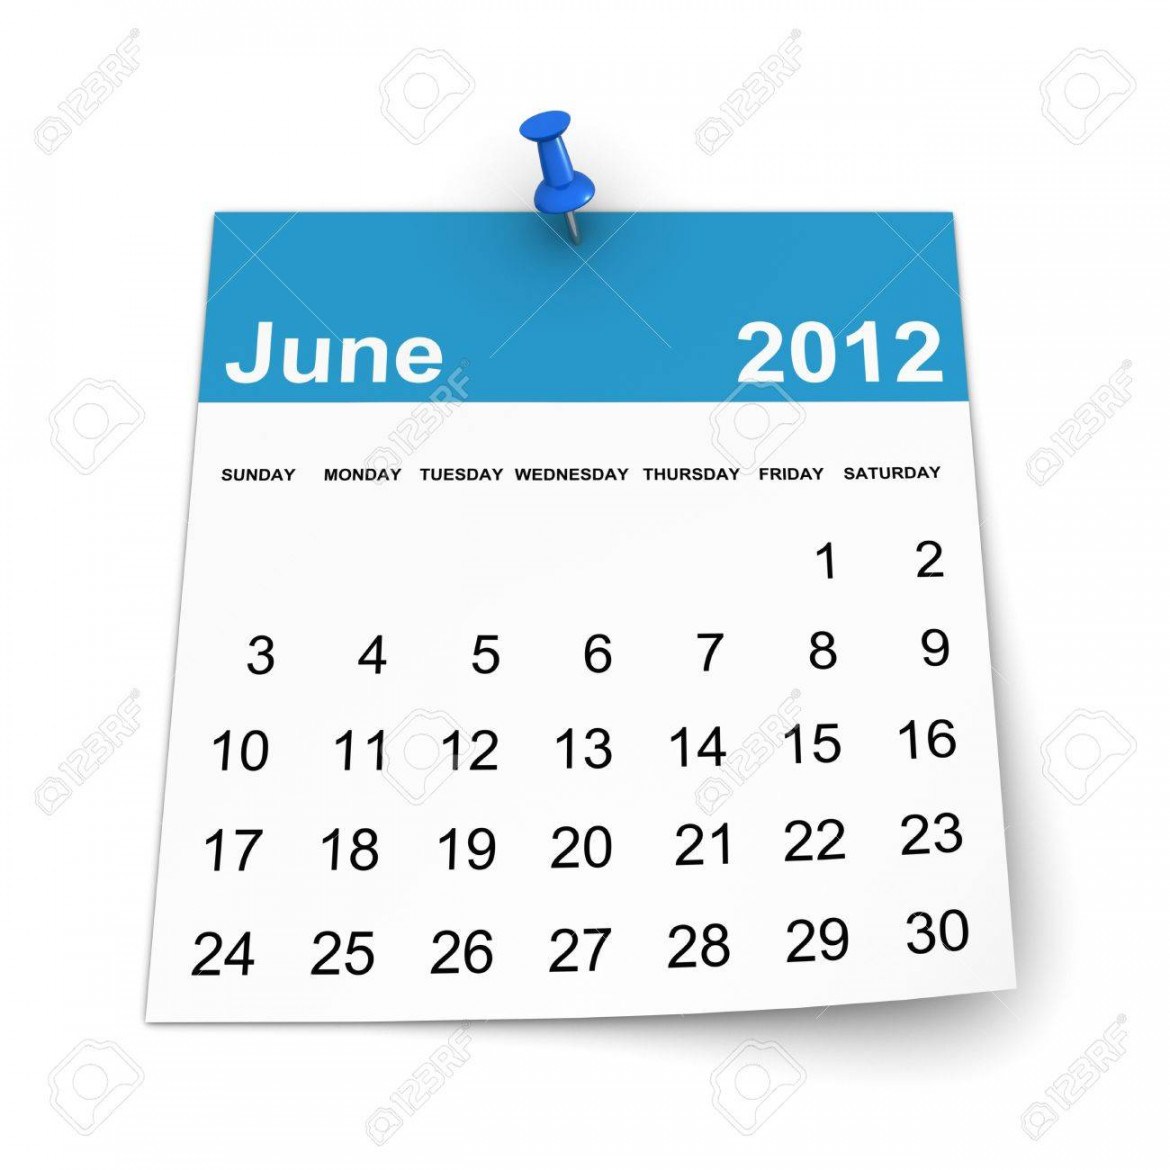 Calendar  - June Stock Photo, Picture and Royalty Free Image